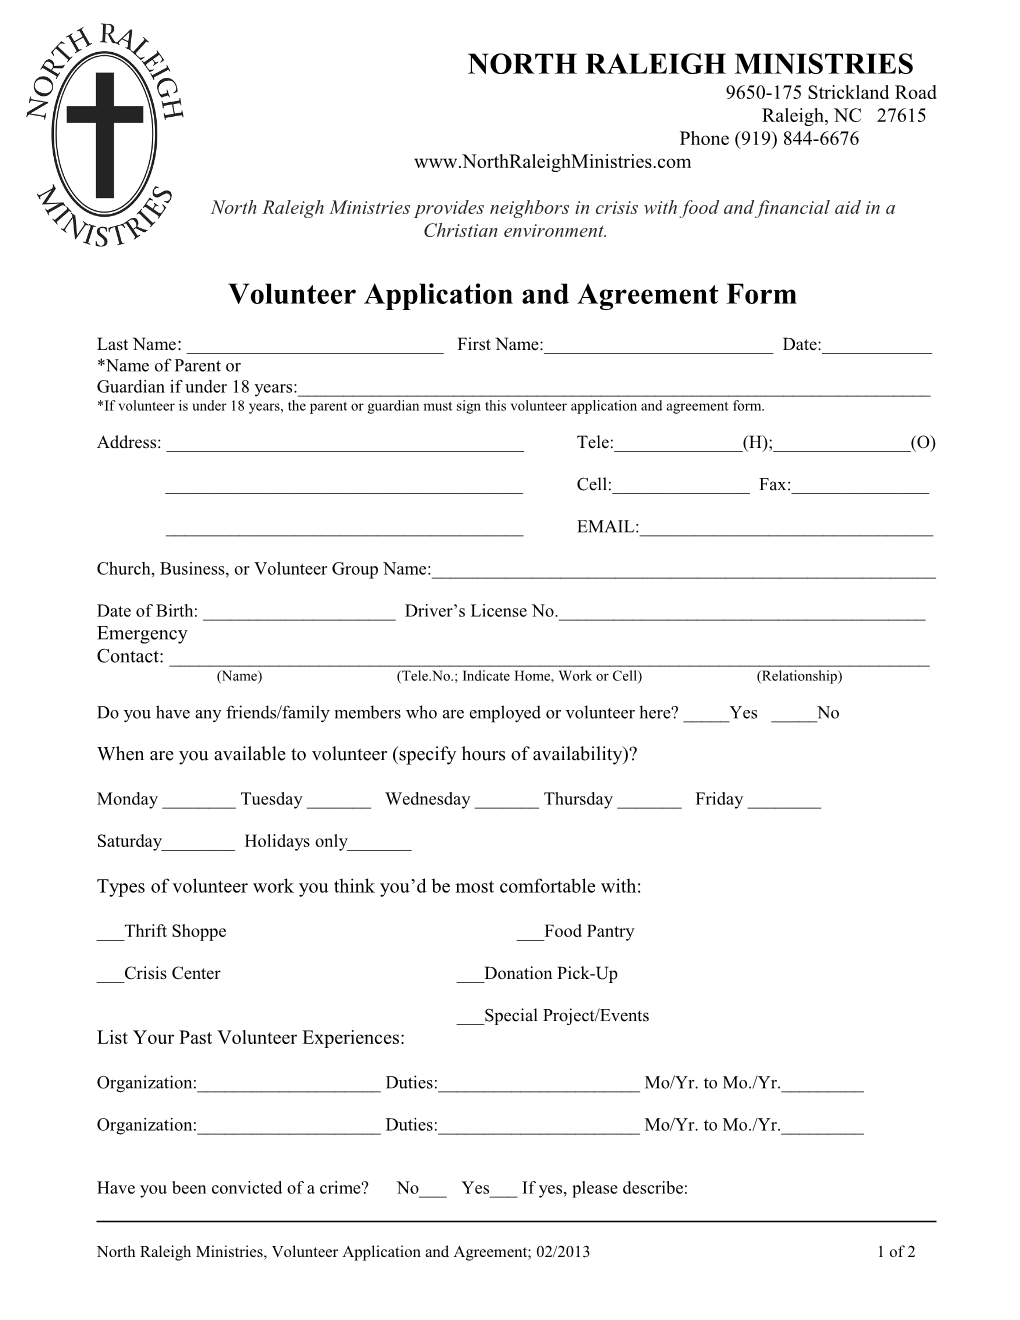 Volunteer Application and Agreement Form (Draft)